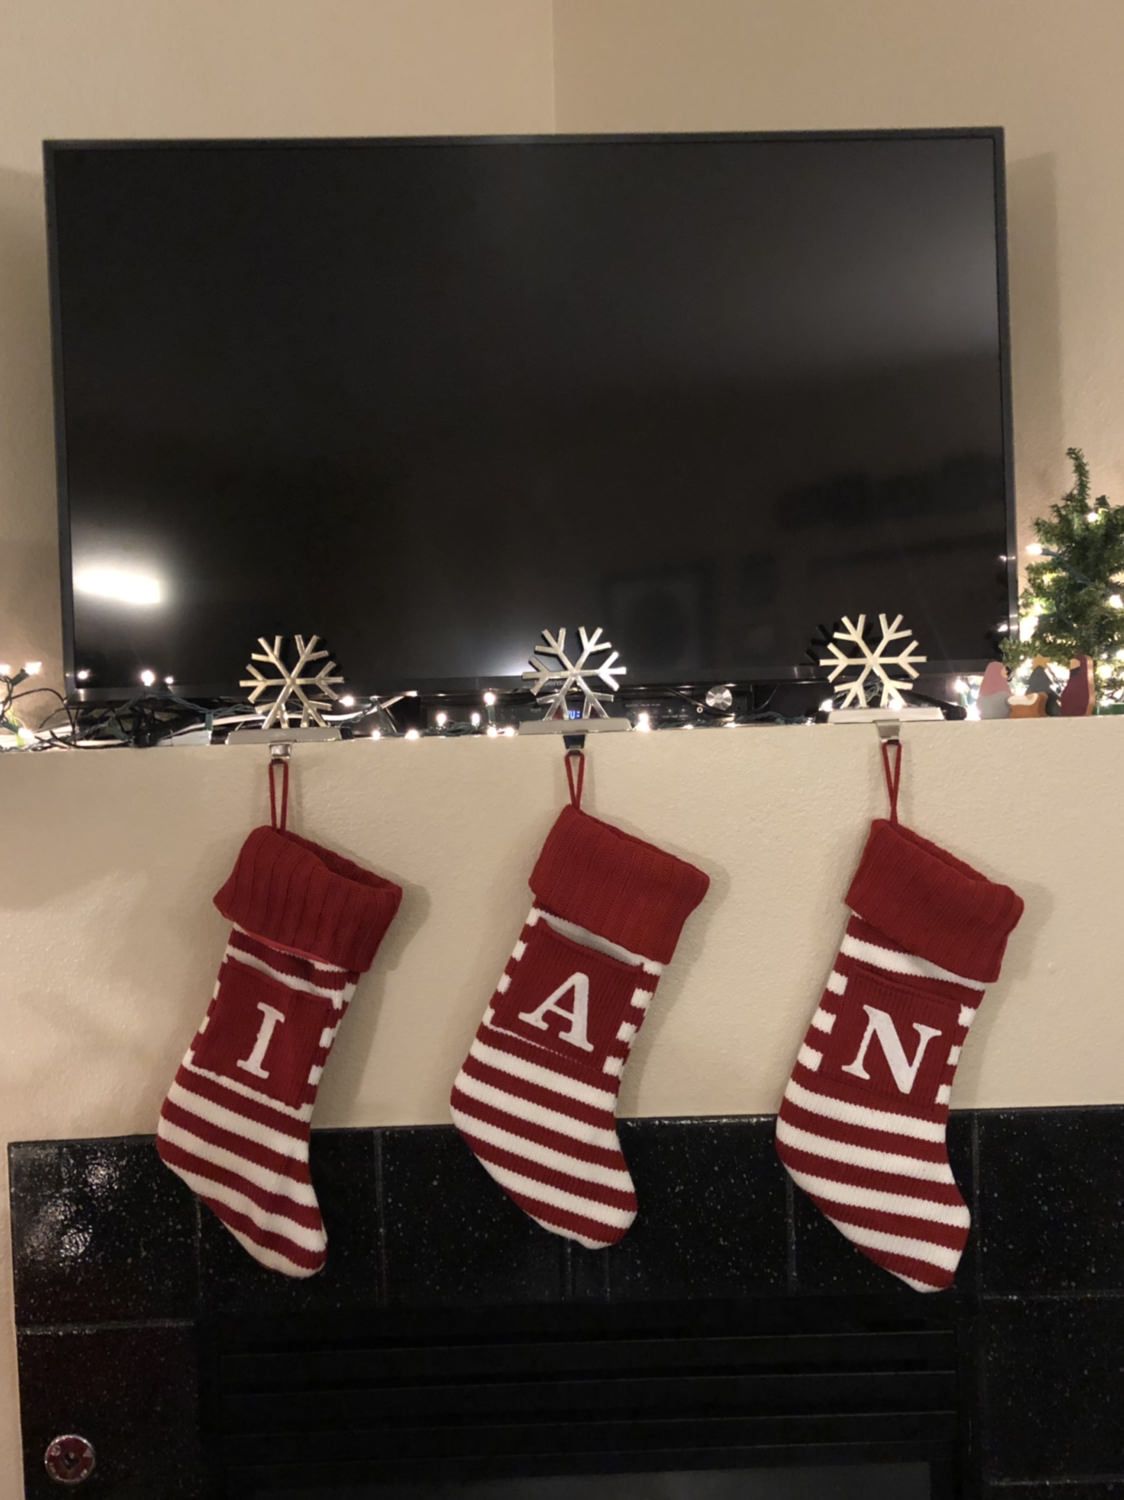 My husband Ian insisted that our new puppy Nala get her own stocking. I thought it was sweet until I realized he had ulterior motives..